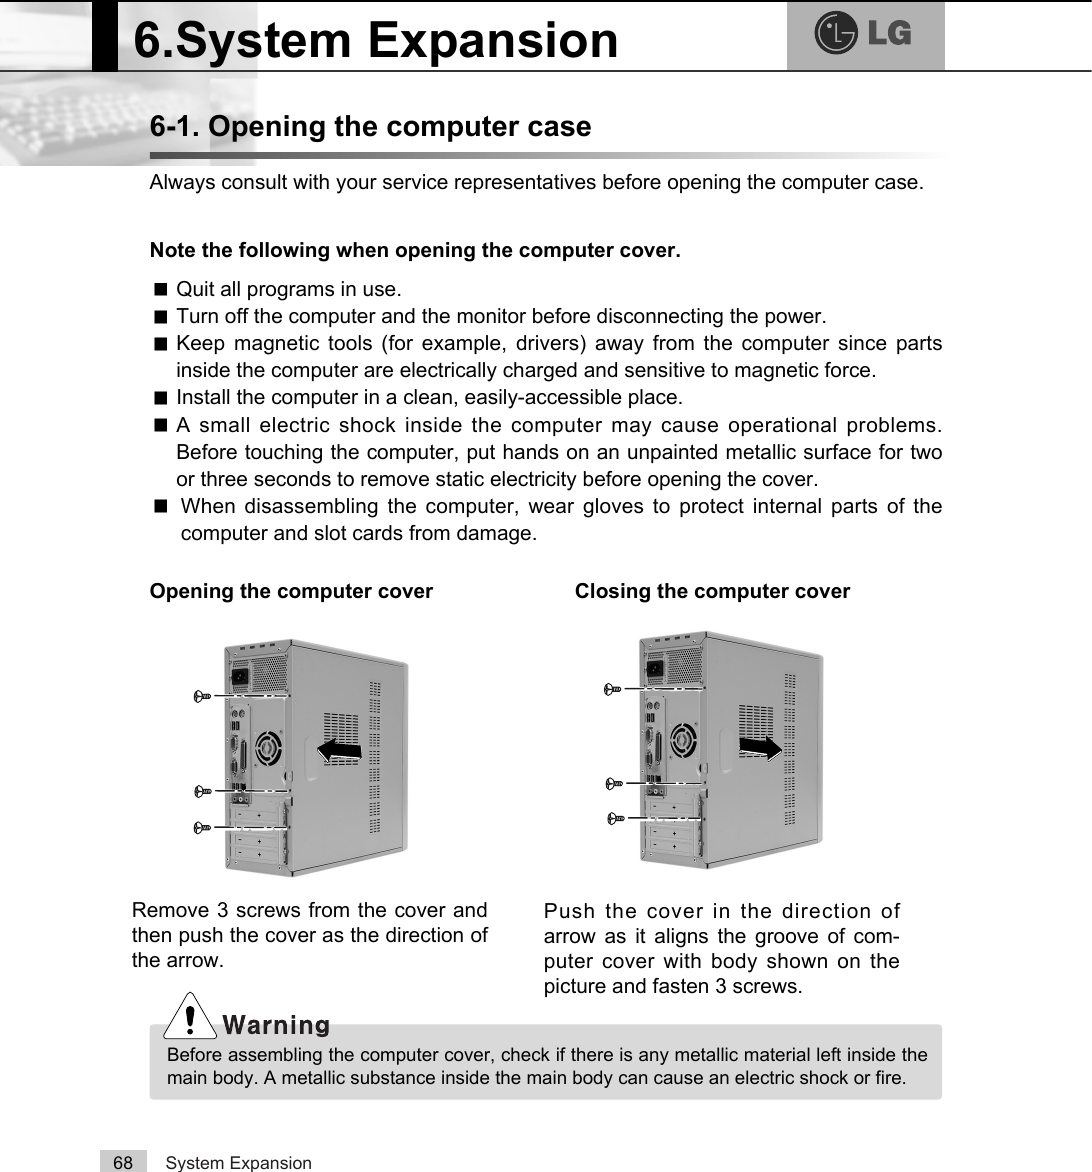 System Expansion686-1. Opening the computer caseAlways consult with your service representatives before opening the computer case.Note the following when opening the computer cover.Opening the computer cover Closing the computer coverQuit all programs in use.Turn off the computer and the monitor before disconnecting the power.Keep magnetic tools (for example, drivers) away from the computer since partsinside the computer are electrically charged and sensitive to magnetic force.Install the computer in a clean, easily-accessible place.A small electric shock inside the computer may cause operational problems.Before touching the computer, put hands on an unpainted metallic surface for twoor three seconds to remove static electricity before opening the cover.When disassembling the computer, wear gloves to protect internal parts of thecomputer and slot cards from damage.6.System ExpansionBefore assembling the computer cover, check if there is any metallic material left inside themain body. A metallic substance inside the main body can cause an electric shock or fire.Remove 3 screws from the cover andthen push the cover as the direction ofthe arrow.Push the cover in the direction ofarrow as it aligns the groove of com-puter cover with body shown on thepicture and fasten 3 screws.